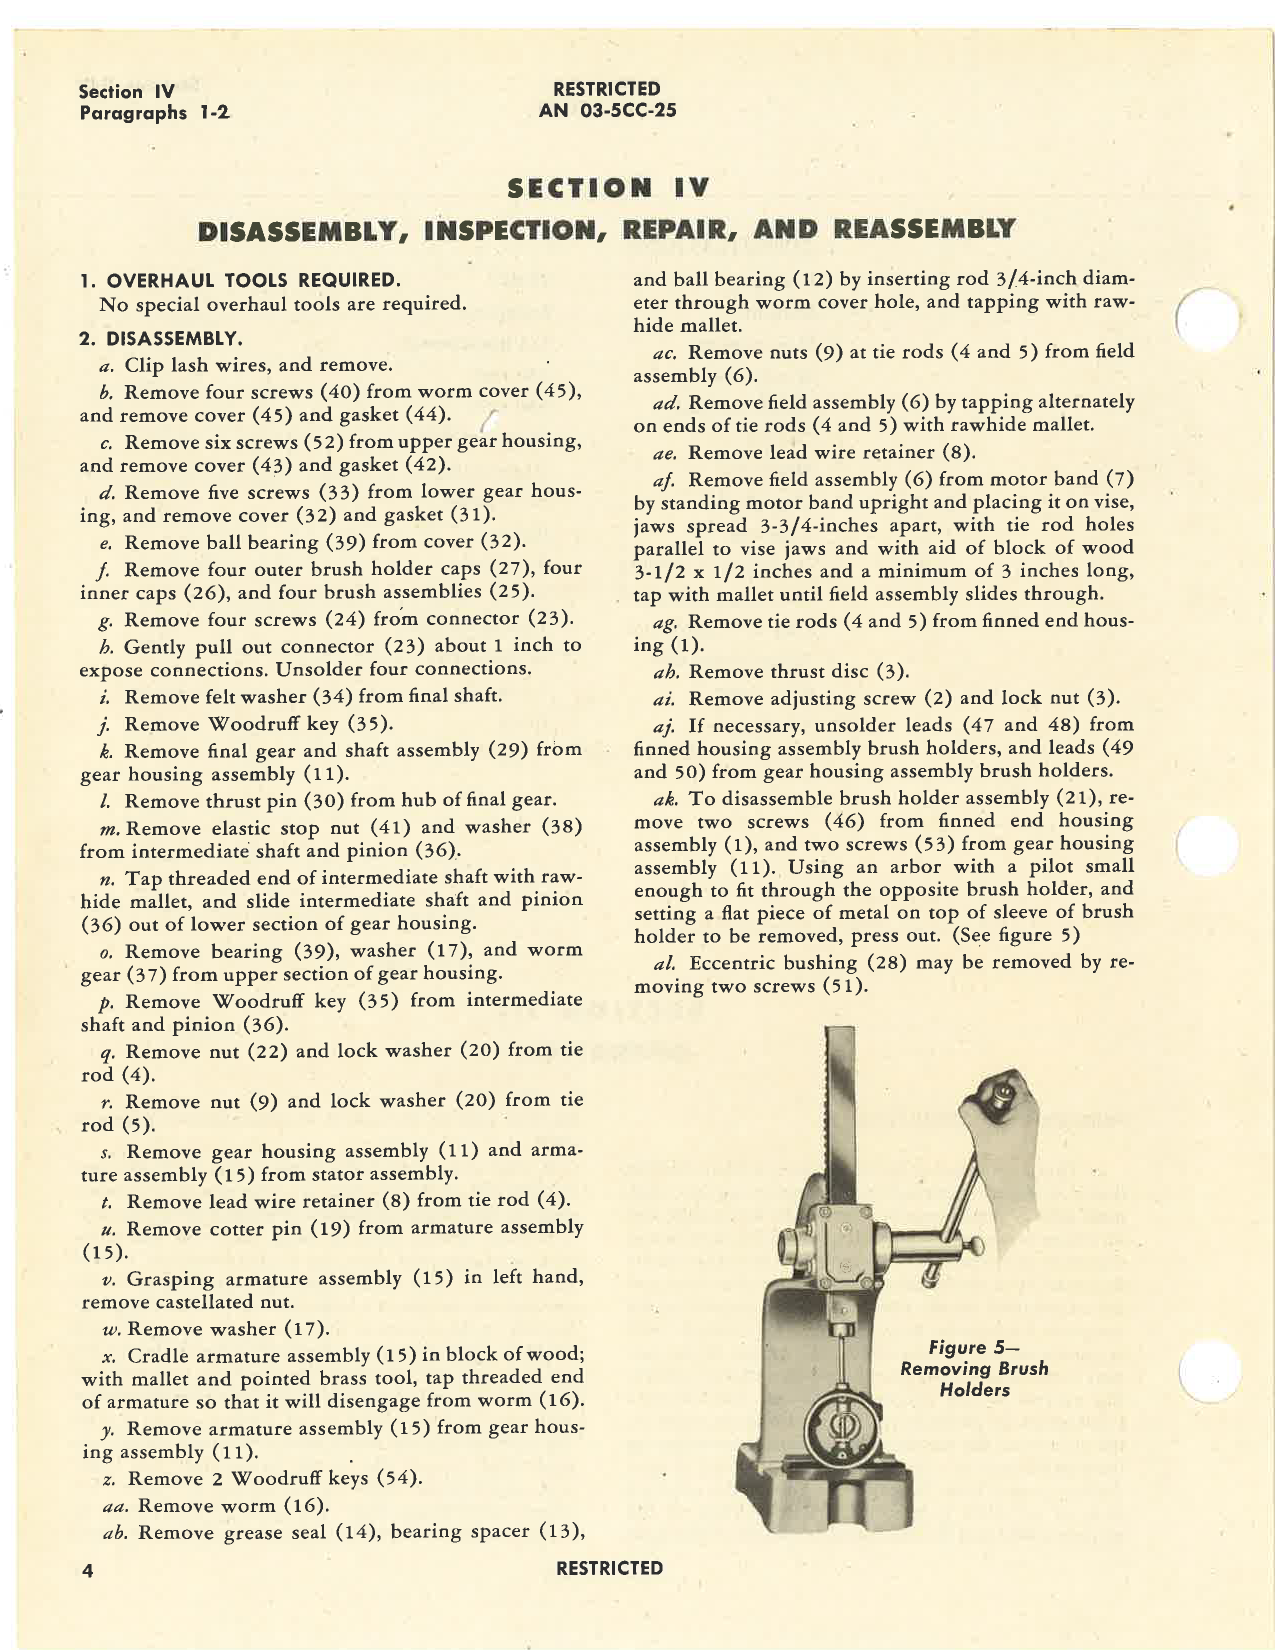 Sample page 8 from AirCorps Library document: Overhaul Instructions with Parts Catalog for Type 921-B Fractional Horsepower Electrical Motor